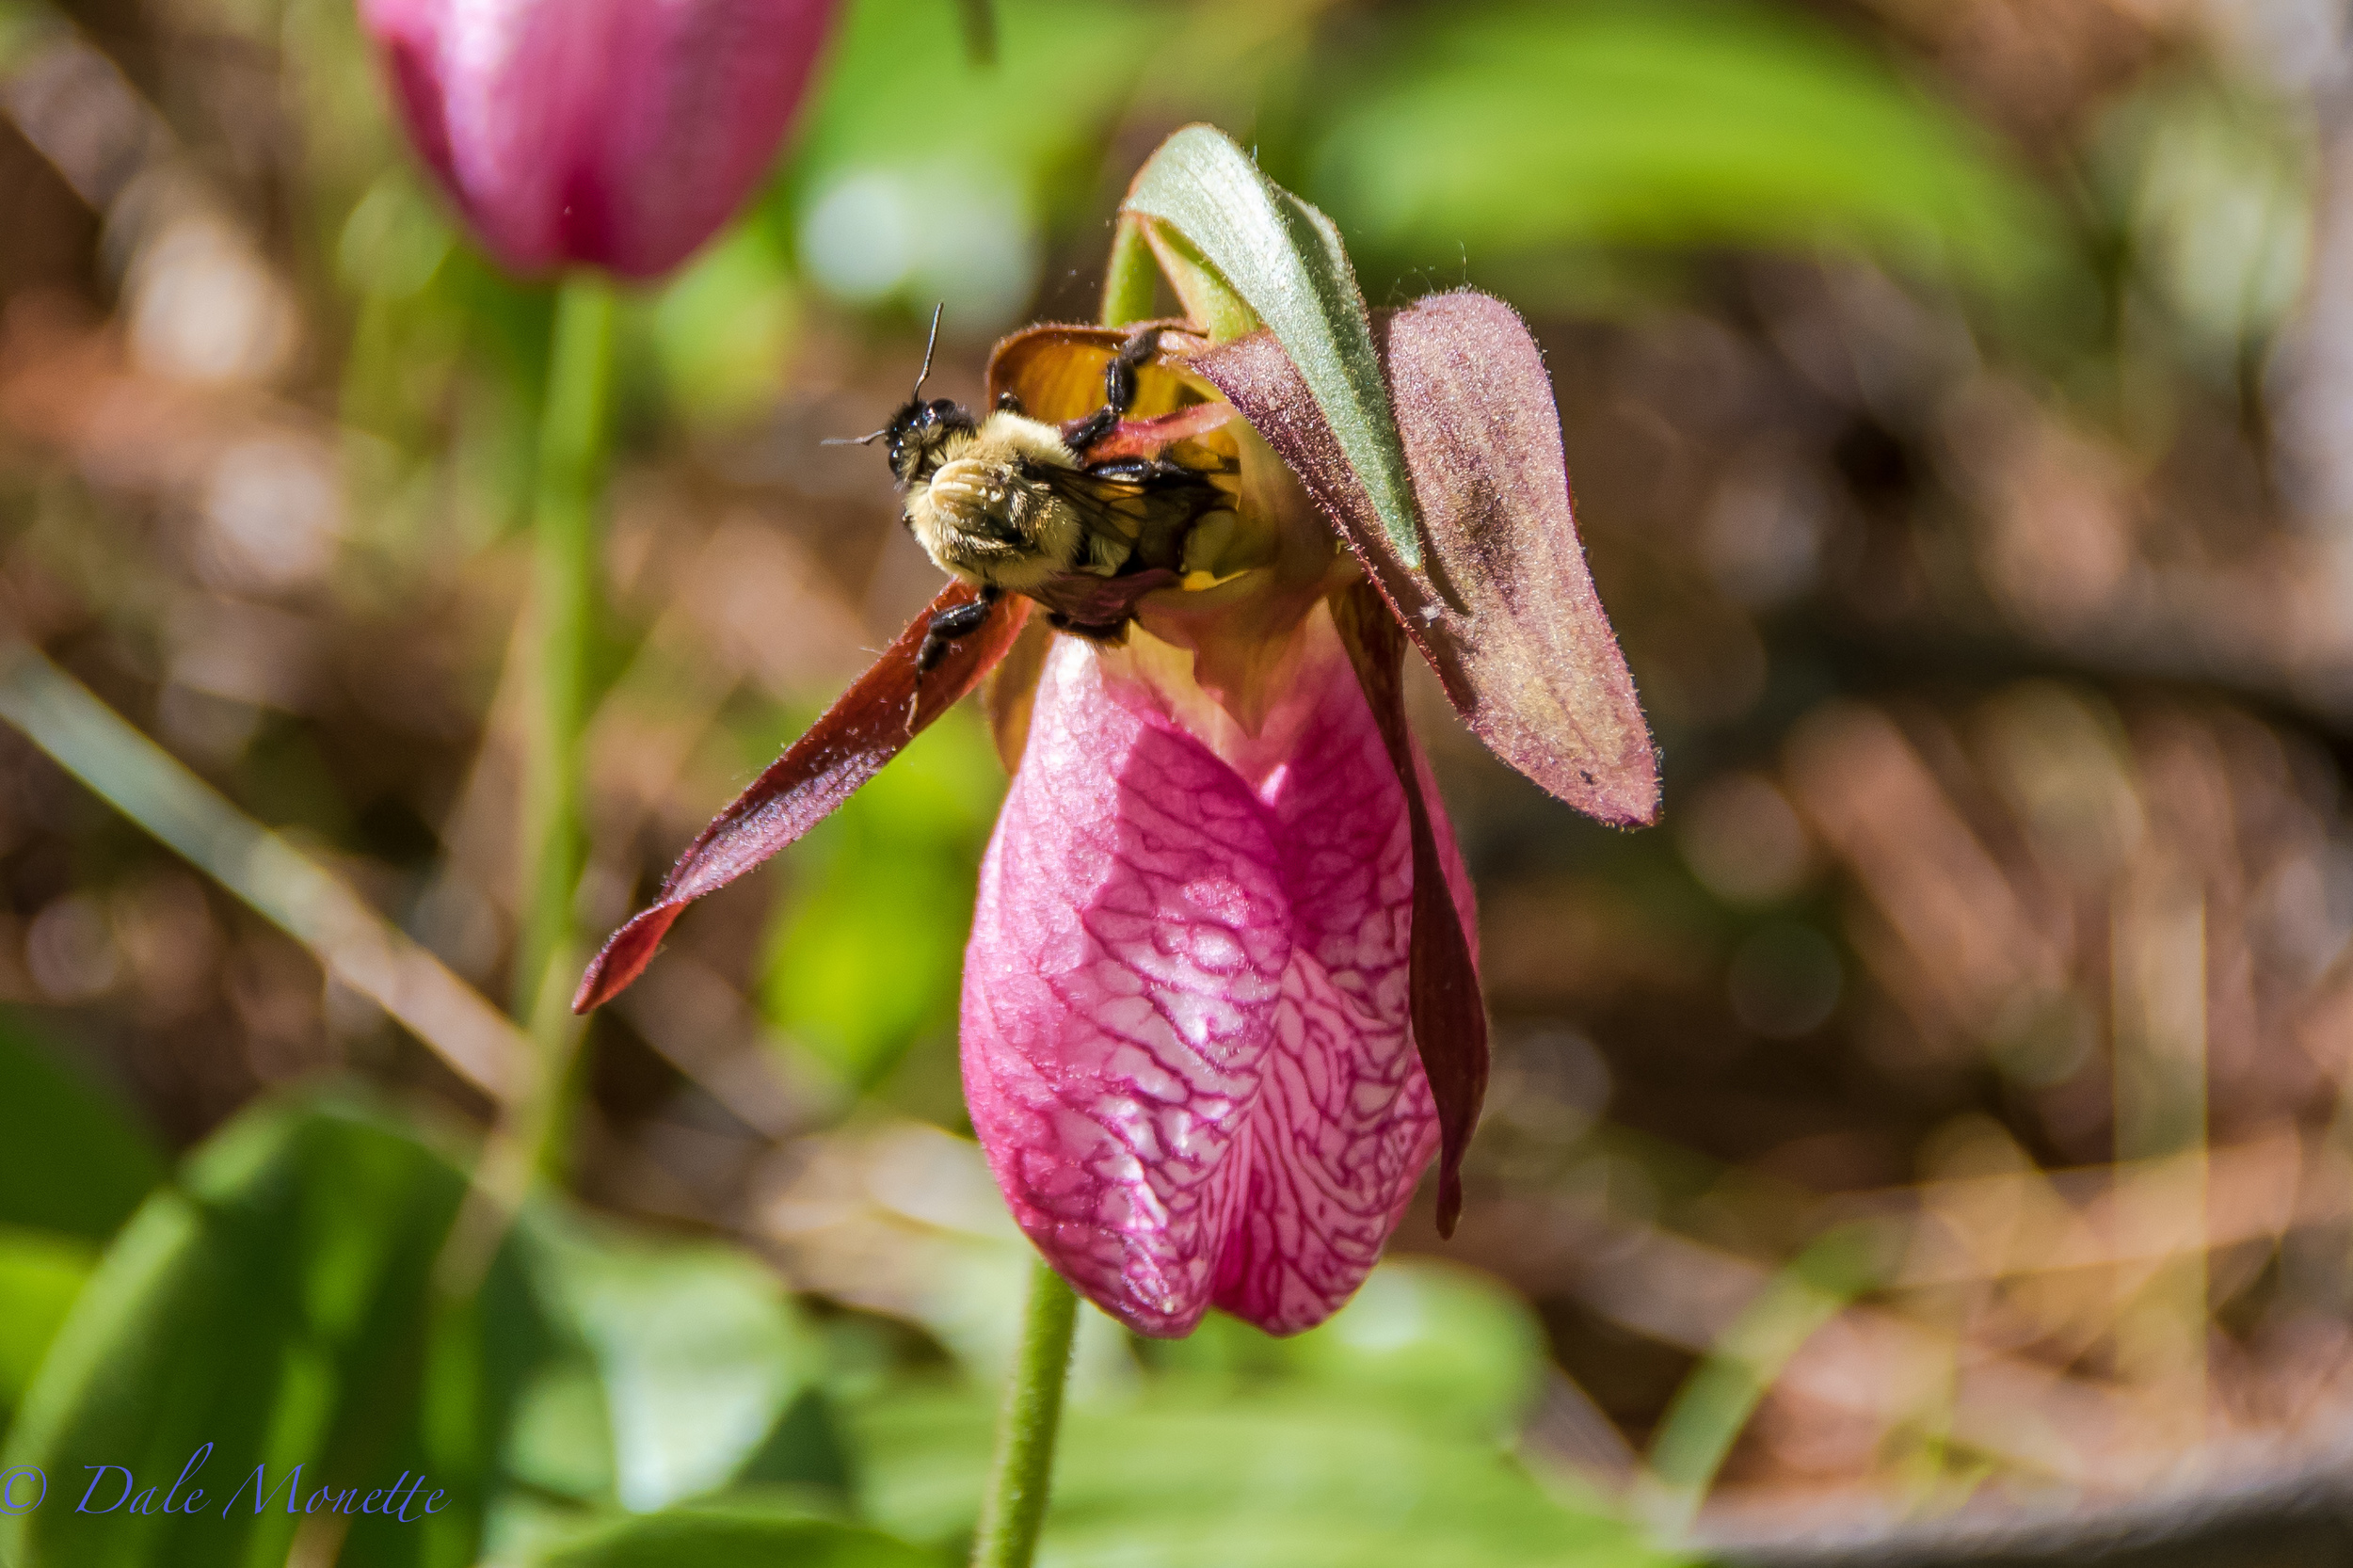   Lady slippers are out in full force right now in the Quabbin watershed. &nbsp;heres a bee that I watched go into the bottom of this flower and come out the top after about 2 minutes of buzzing around inside. &nbsp;6/2/16  